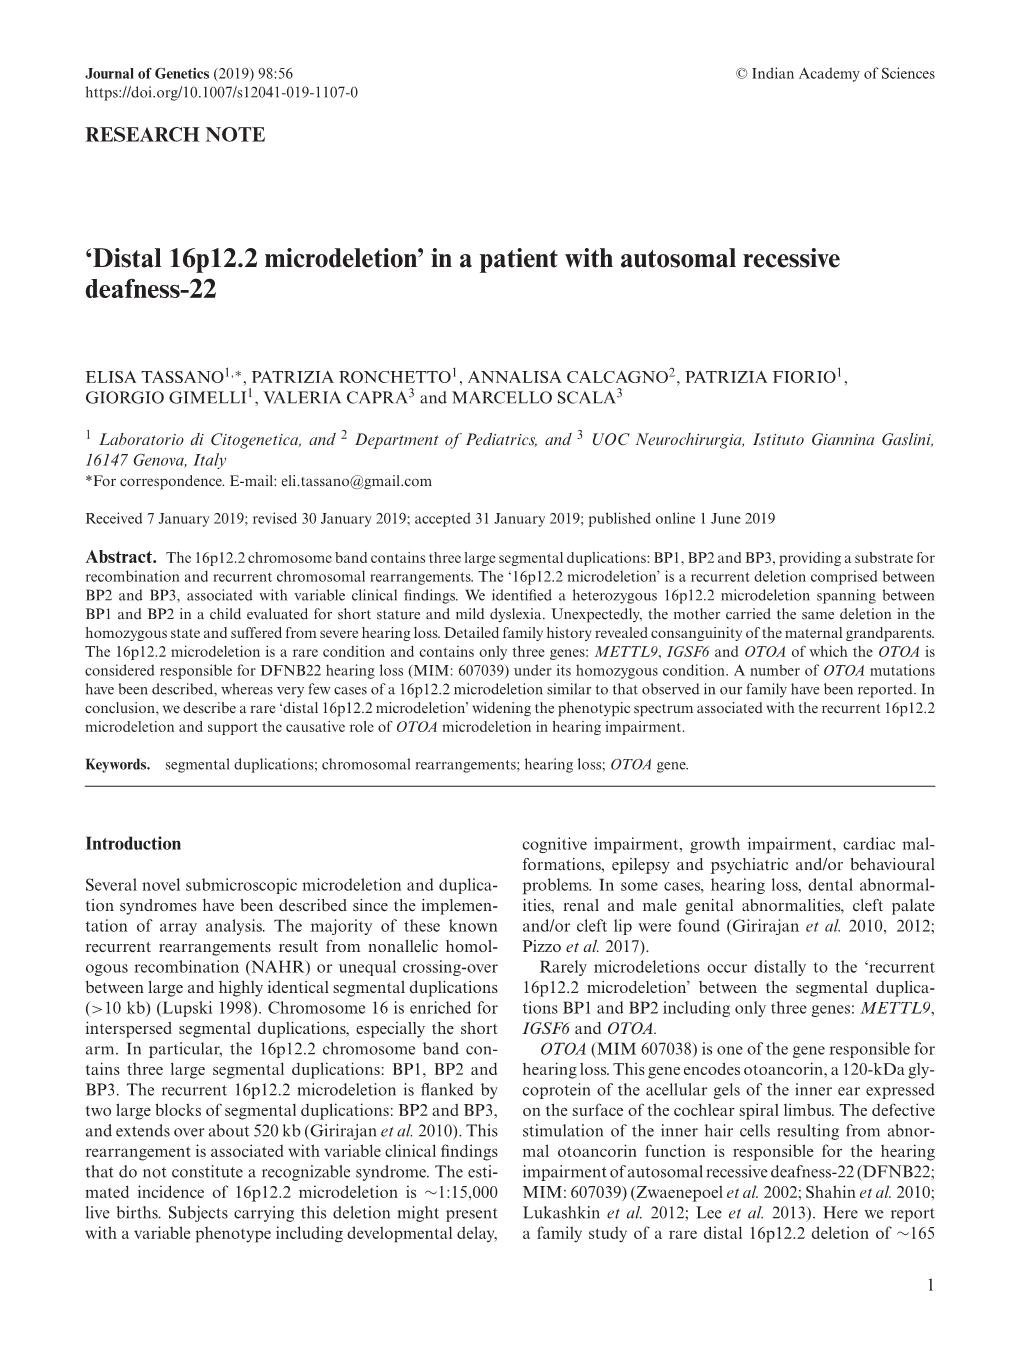 'Distal 16P12.2 Microdeletion' in a Patient with Autosomal Recessive